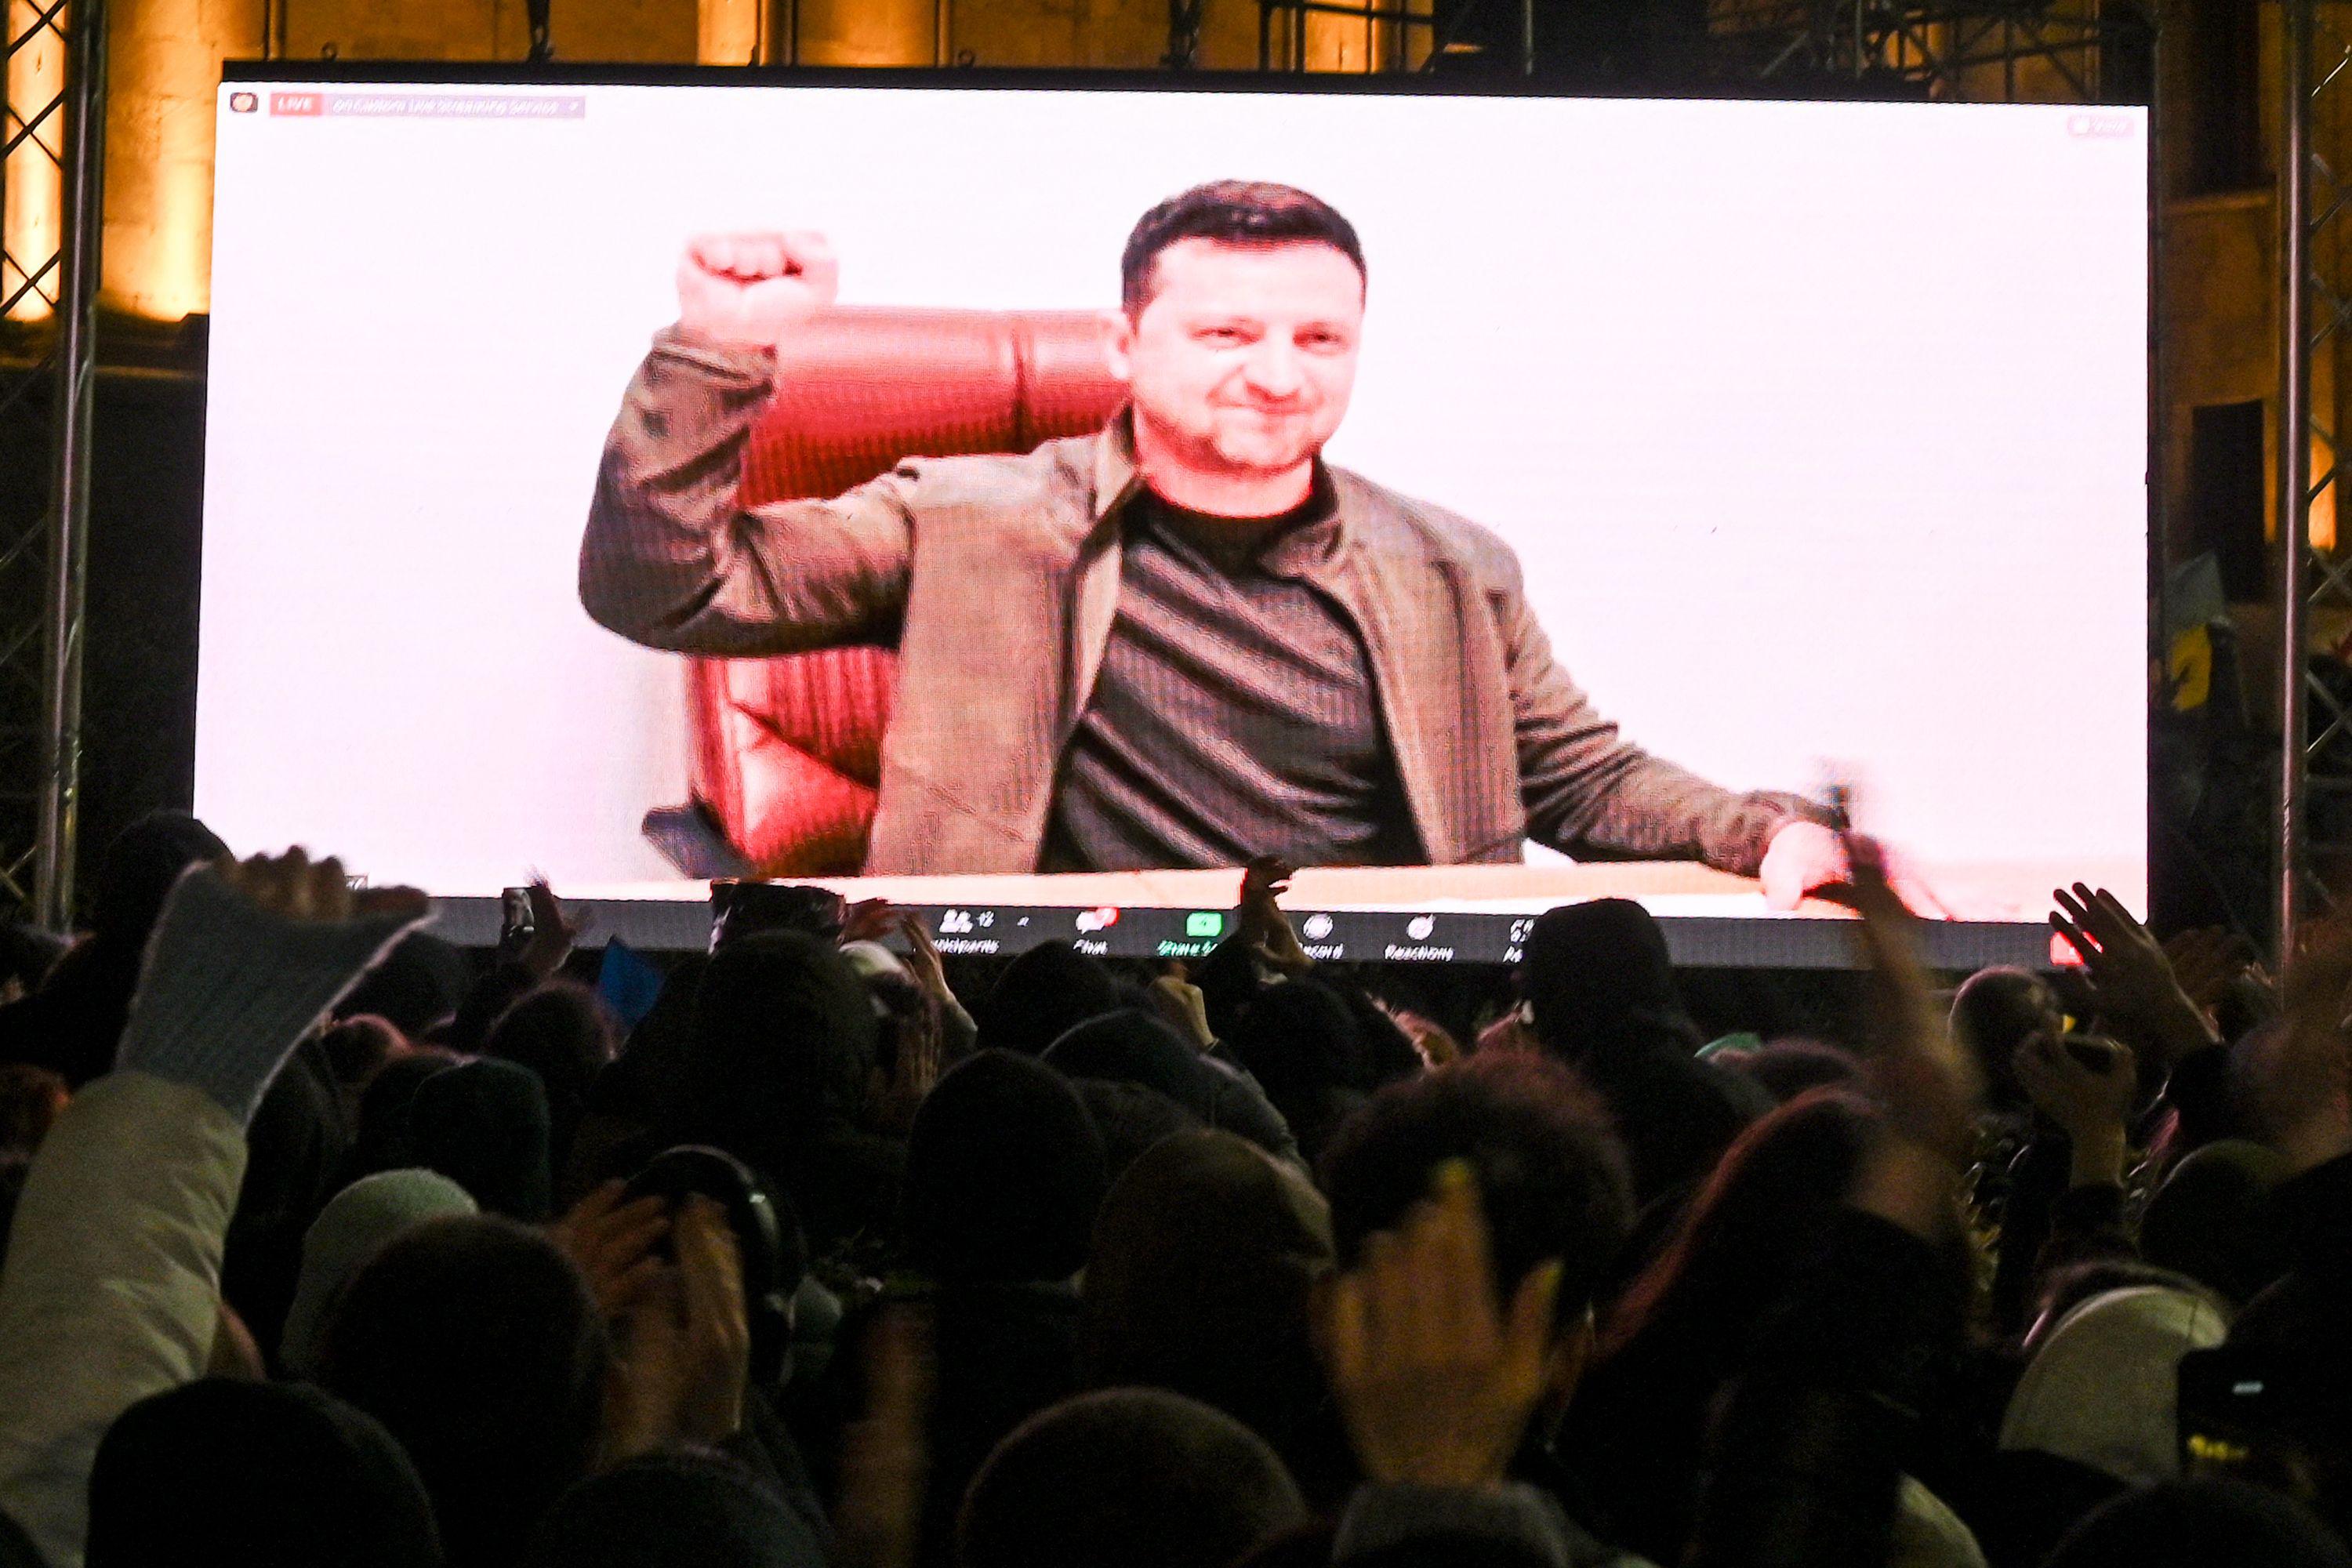 Zelensky raises a fist on a large TV screen in front of a crowd.